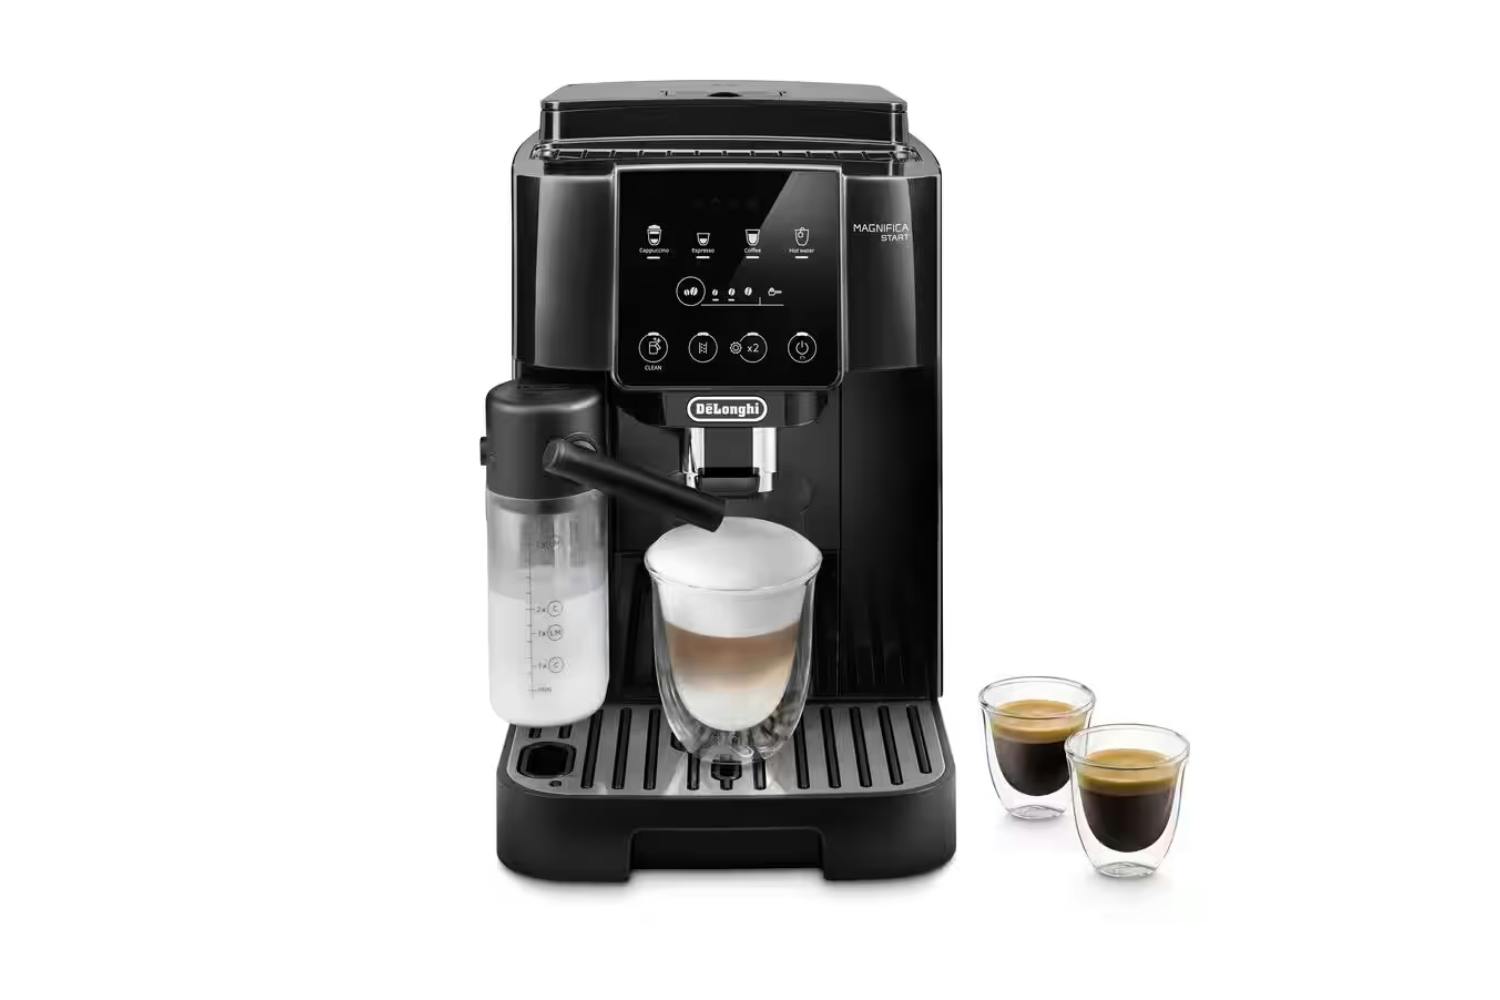 DeLonghi Magnifica Start Fully Automatic Bean to Cup Coffee Machine | ECAM220.60.B | Black